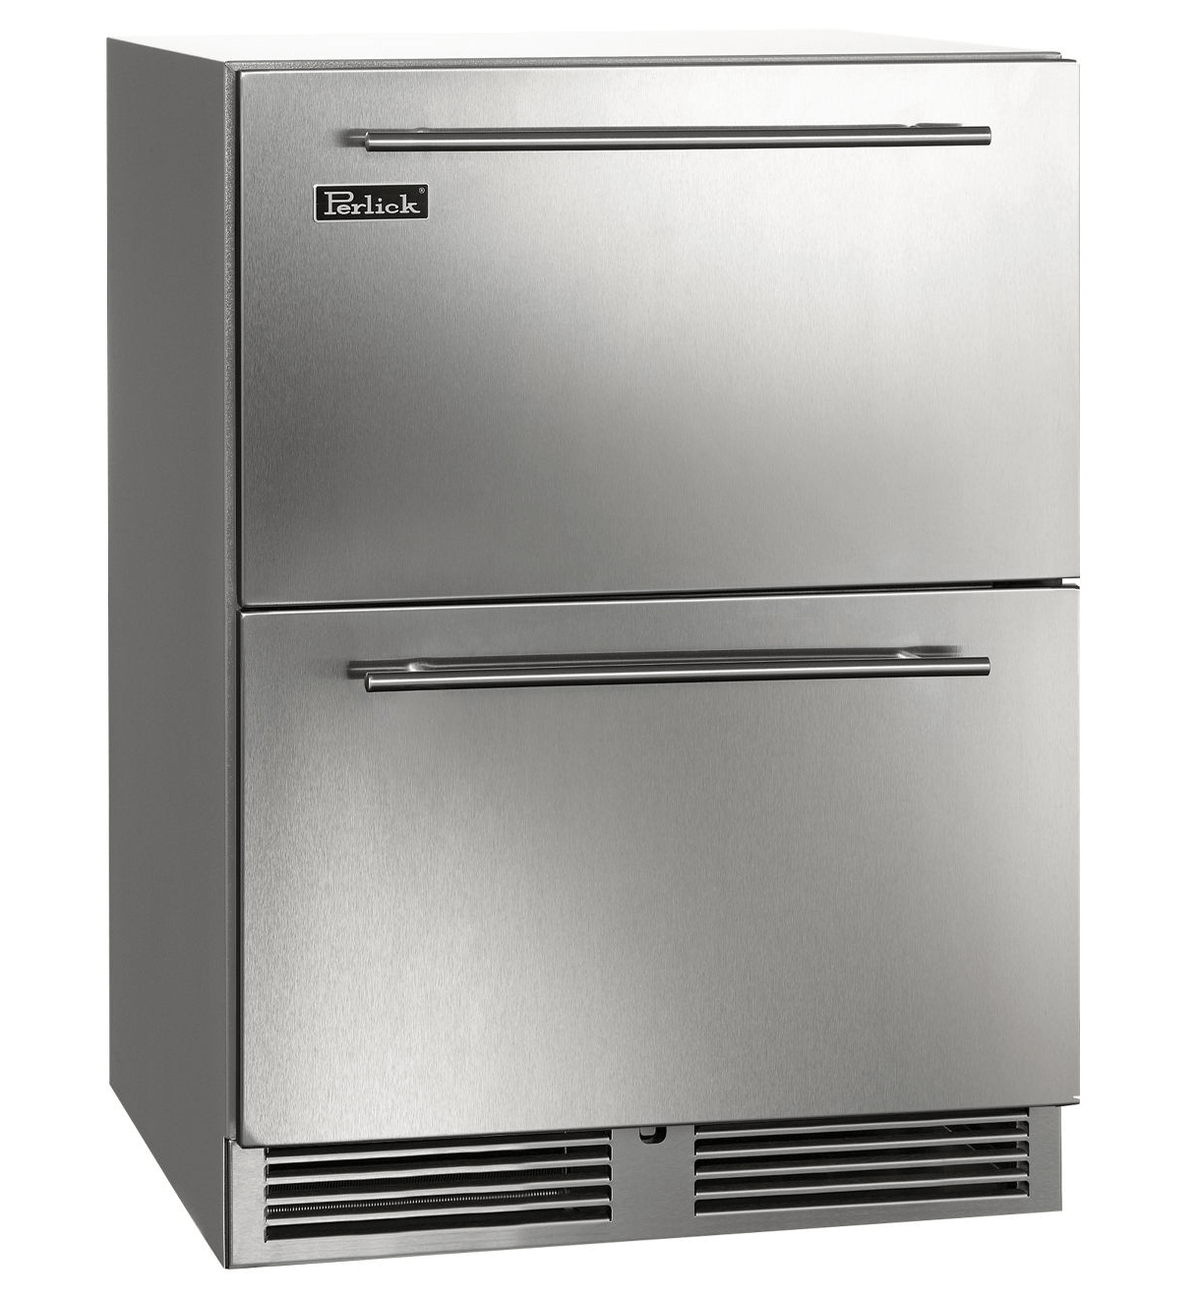 Perlick Refrigeration + Cooling Stainless Steel Drawers Perlick 24&quot; C-Series Built-In Refrigerated Drawers / HC24RO-4 Drawers